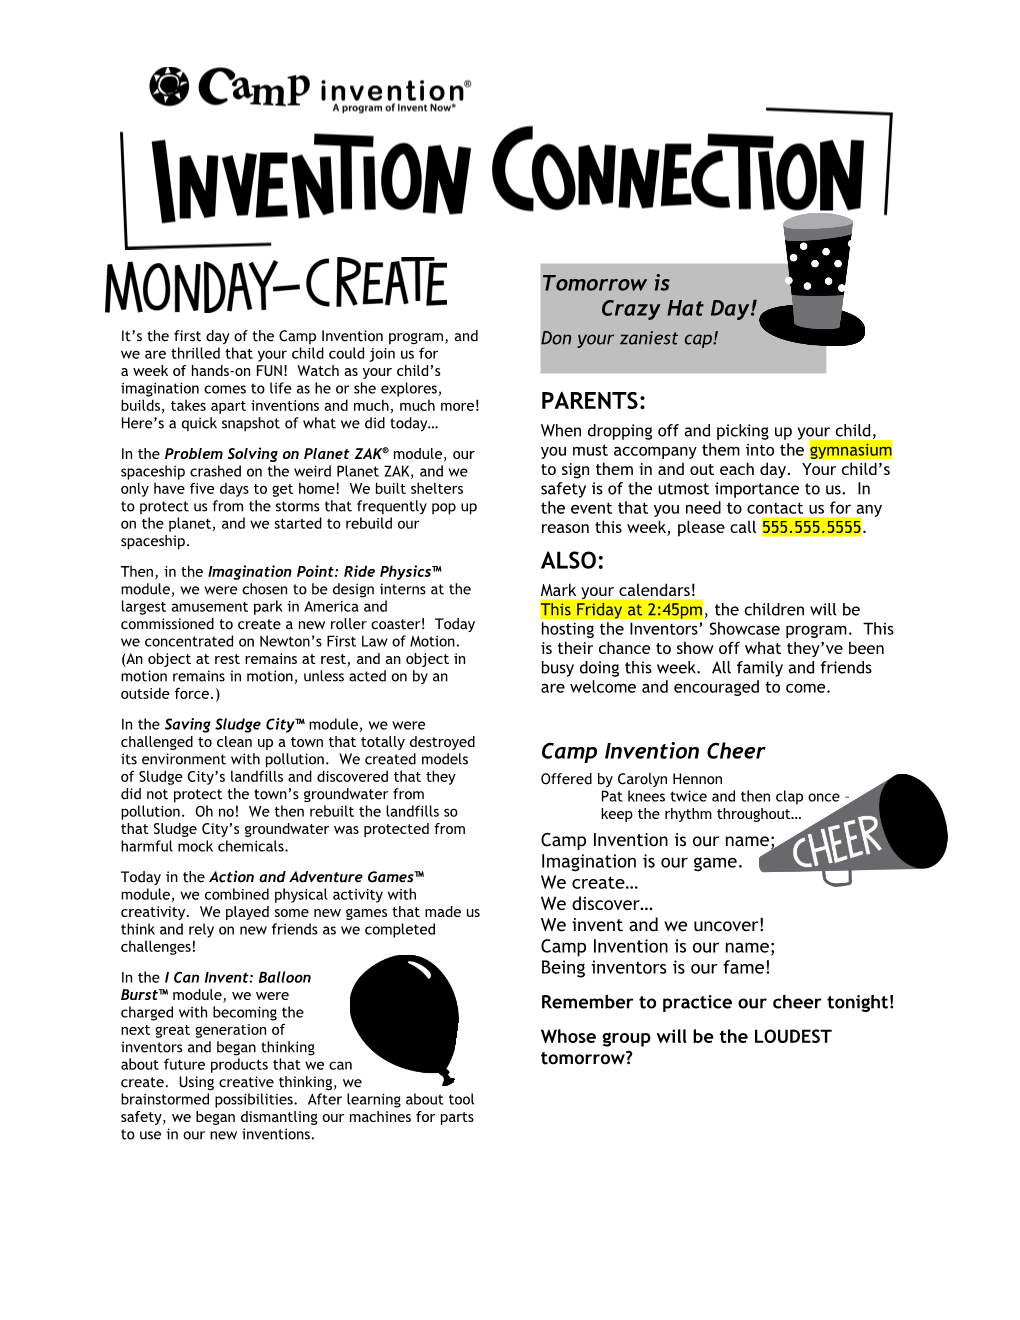 It S the First Day of the Camp Invention Program, and We Are Thrilled That Your Child Could